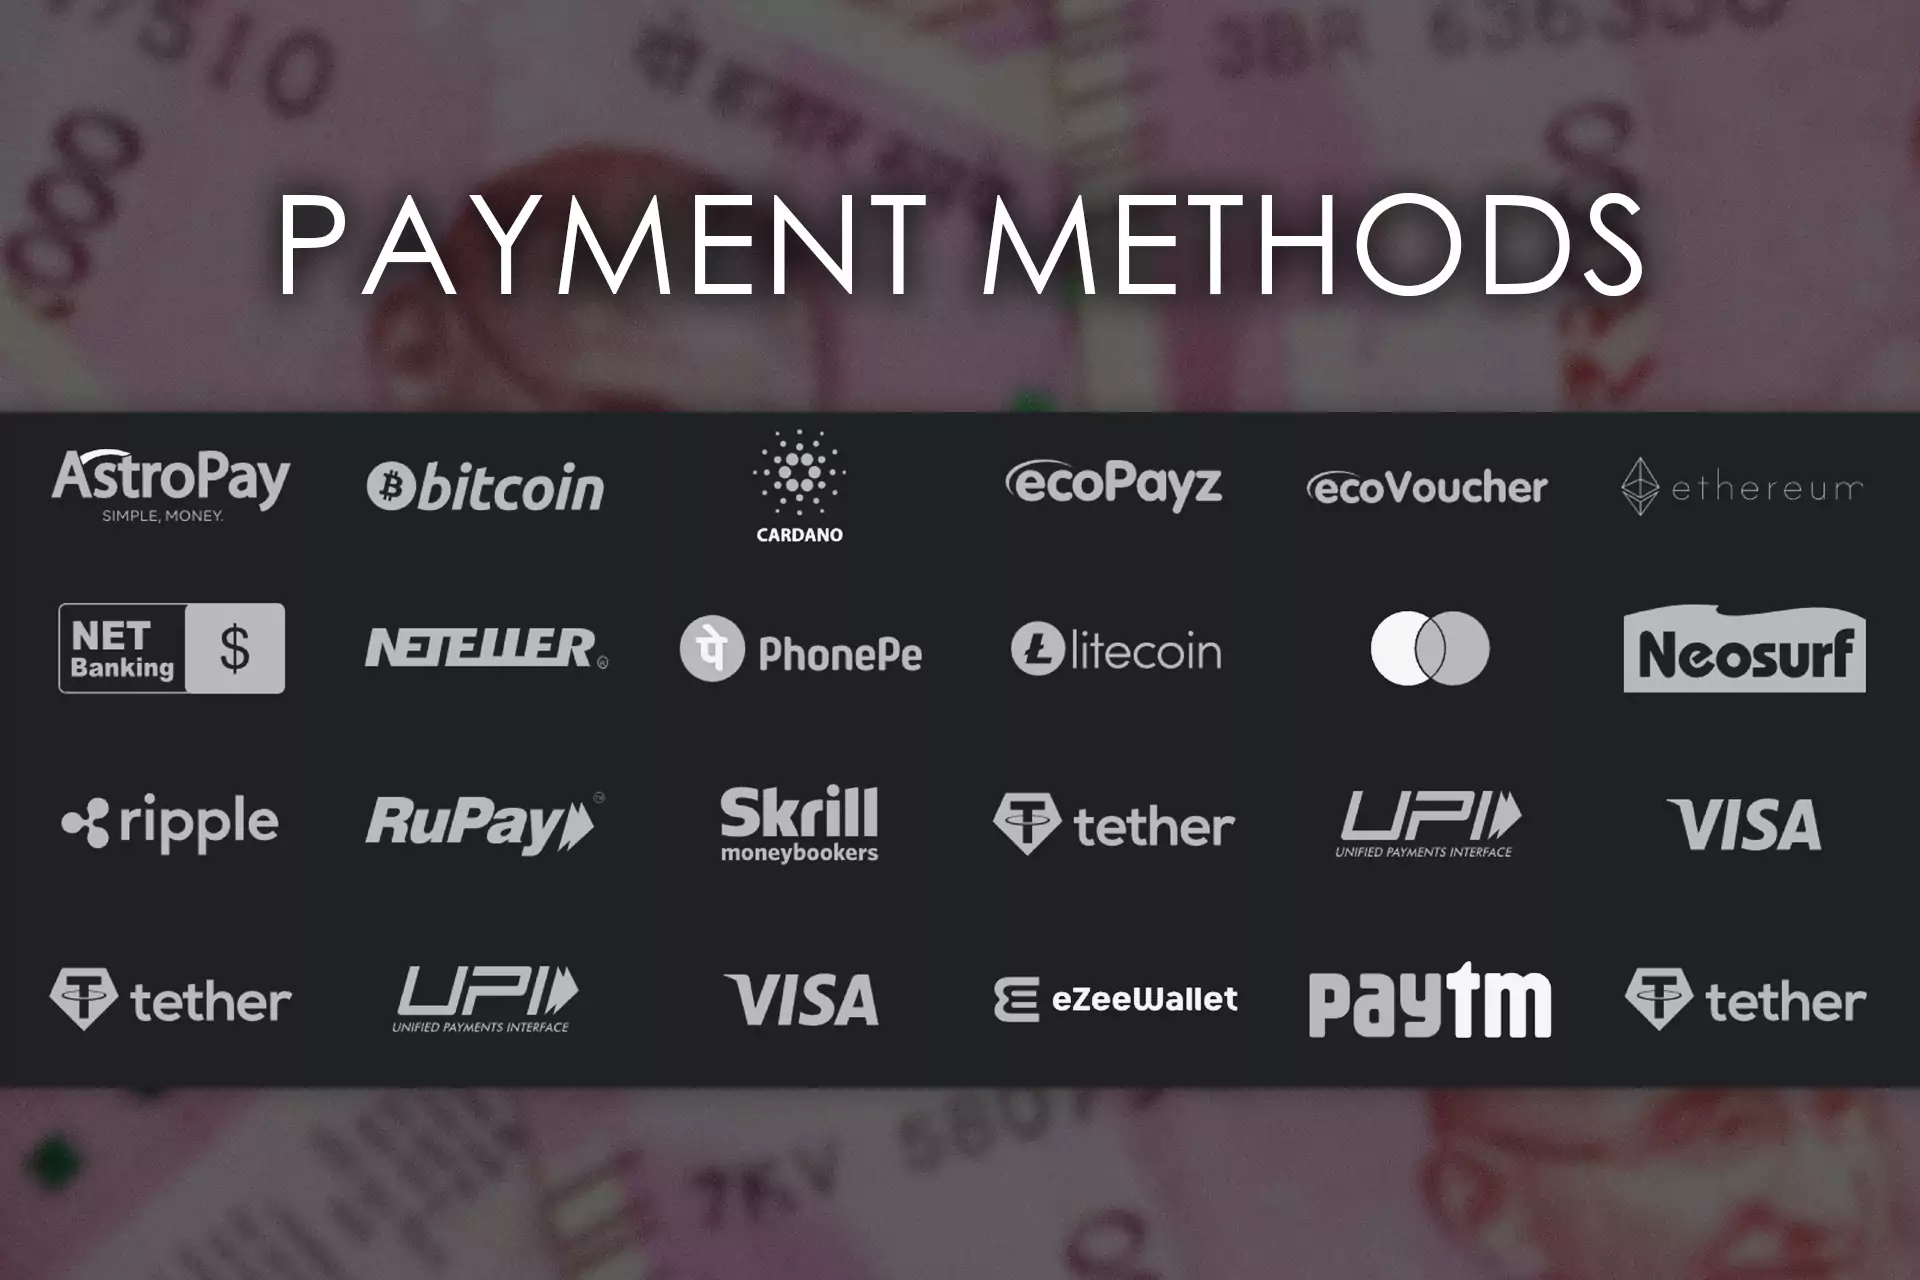 Use your favorite payment system to top up an account or withdraw funds.